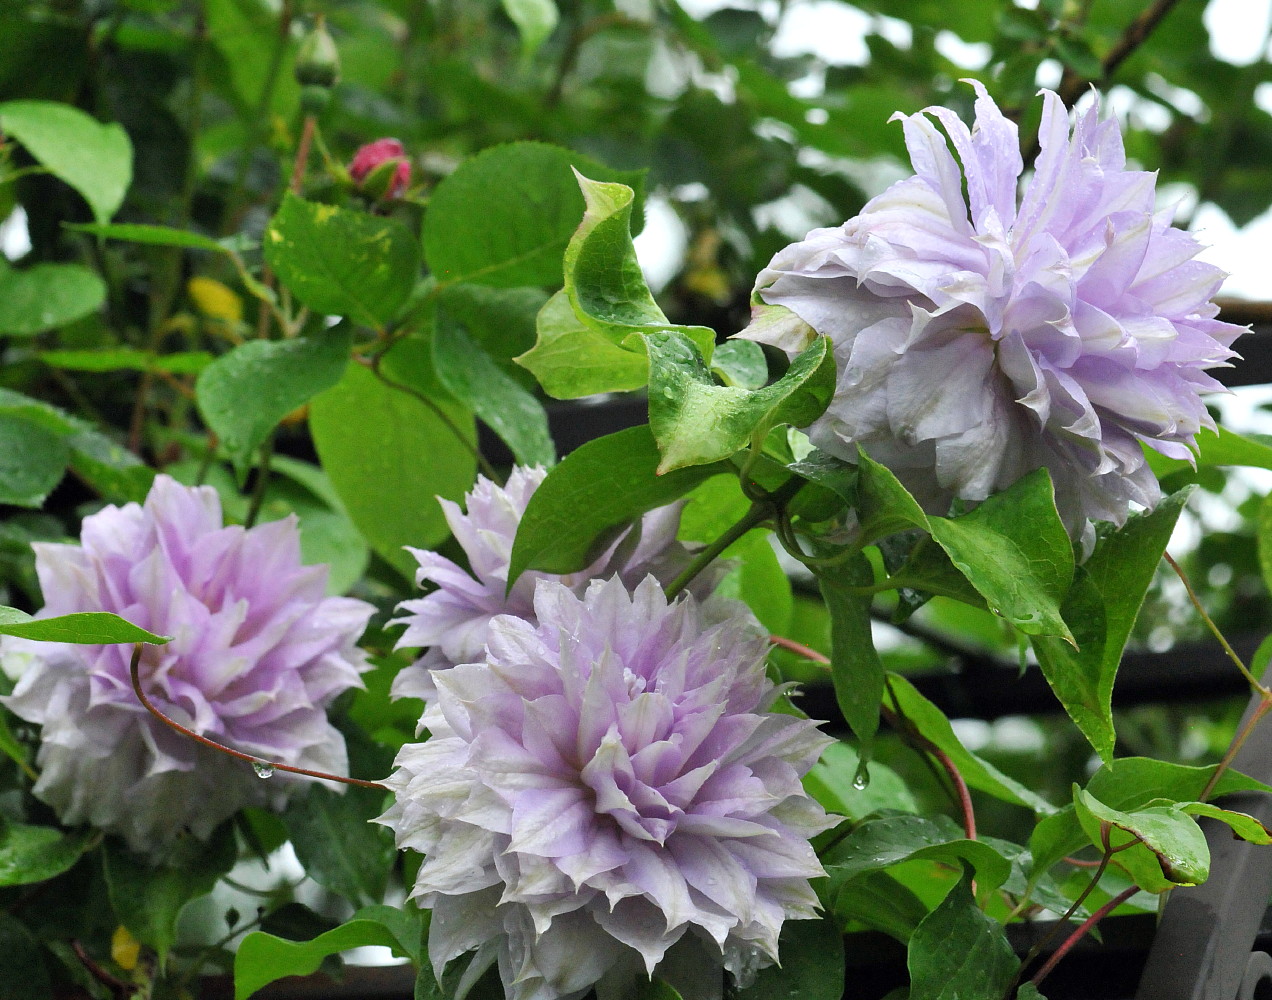 Belle of Woking Clematis Vine - Double Flower/Pink to Silvery Mauve - 2.5" Pot - image 2 of 2